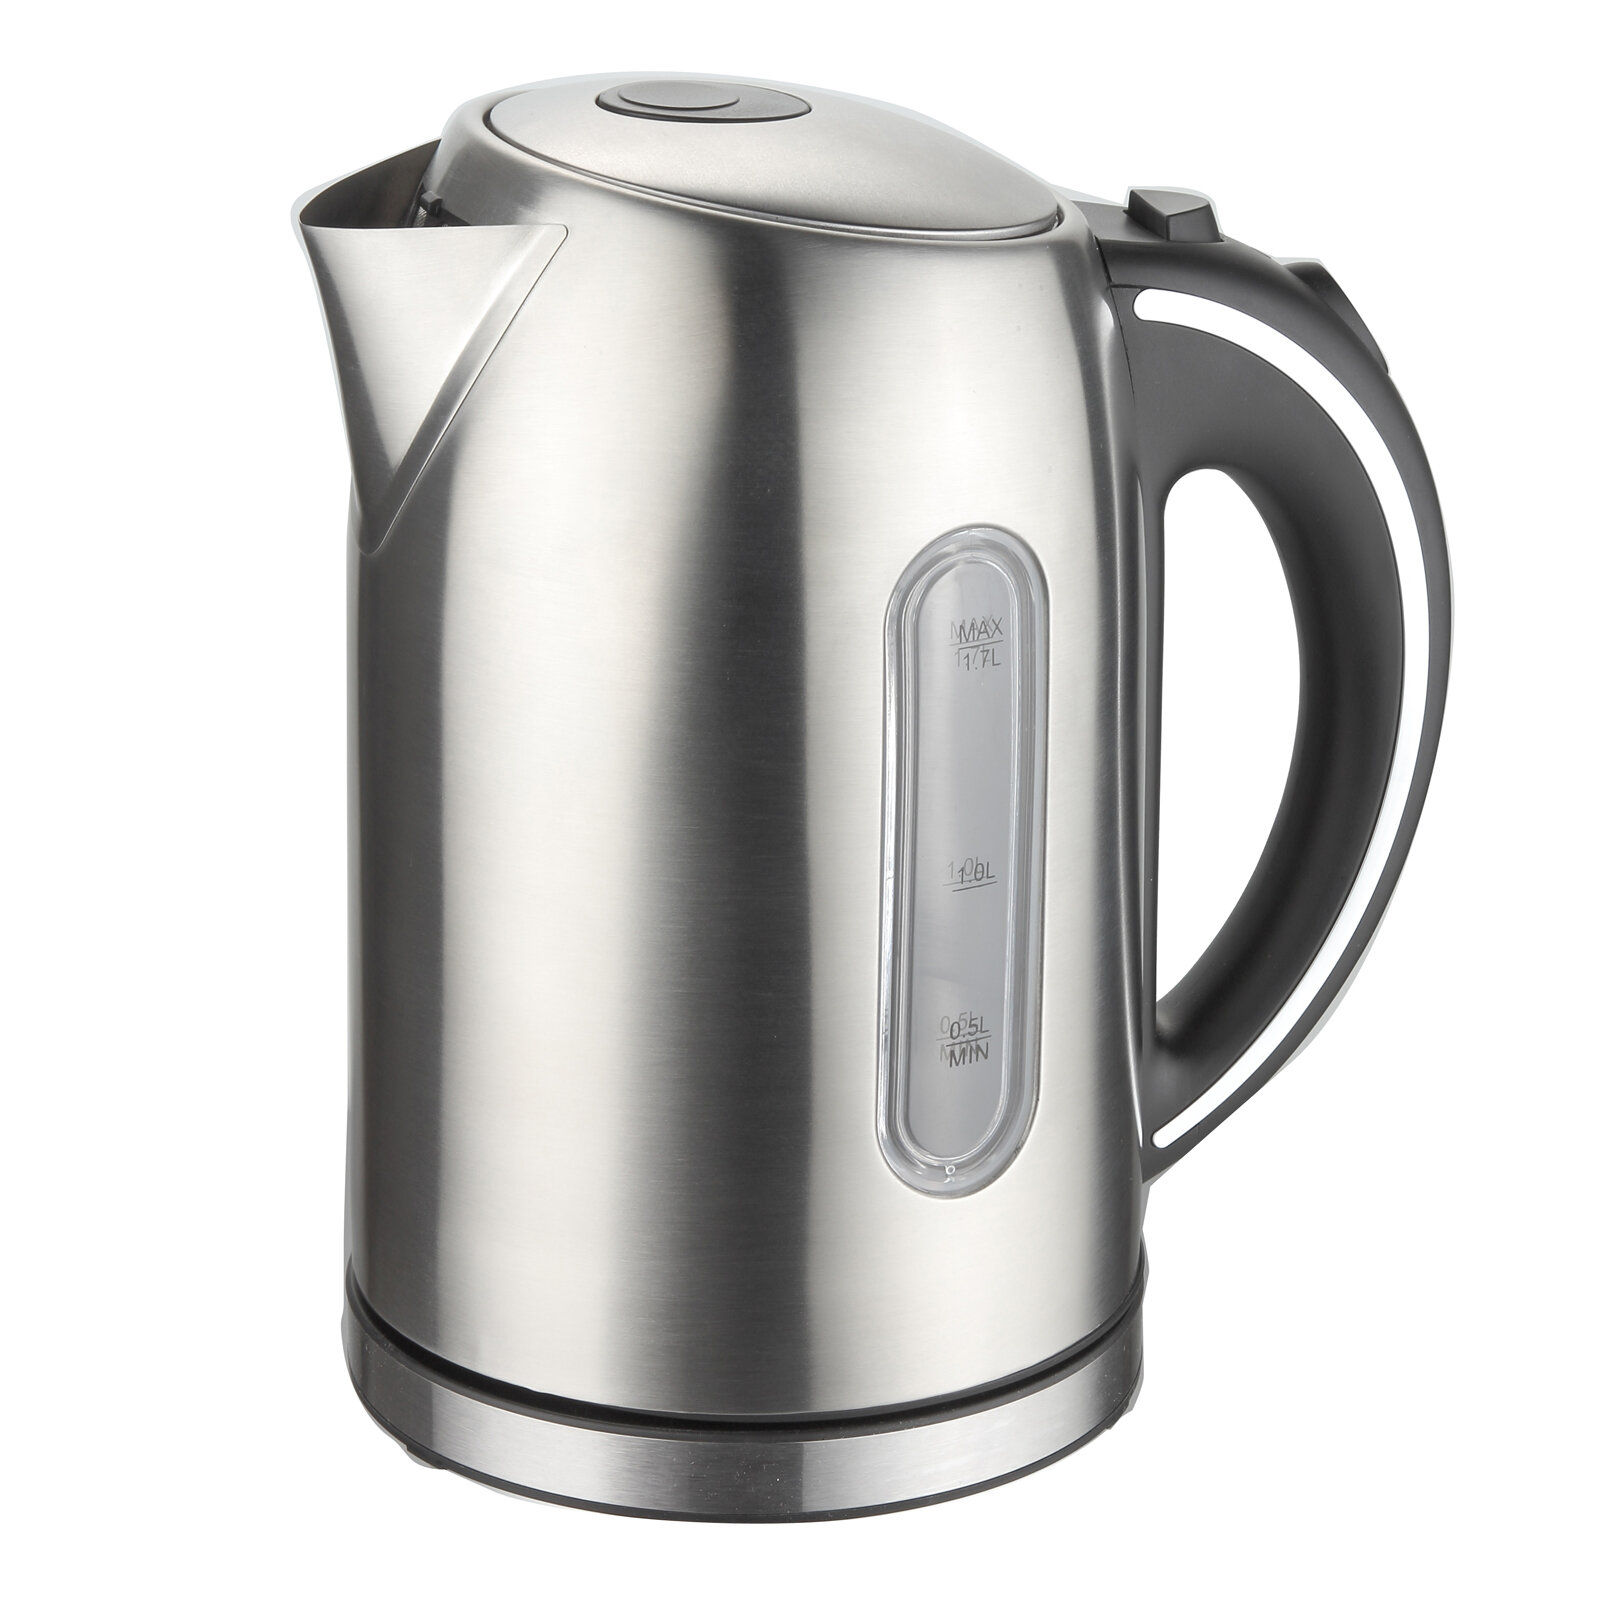 SMEG Variable Temperature Electric Kettle — Yes Chef